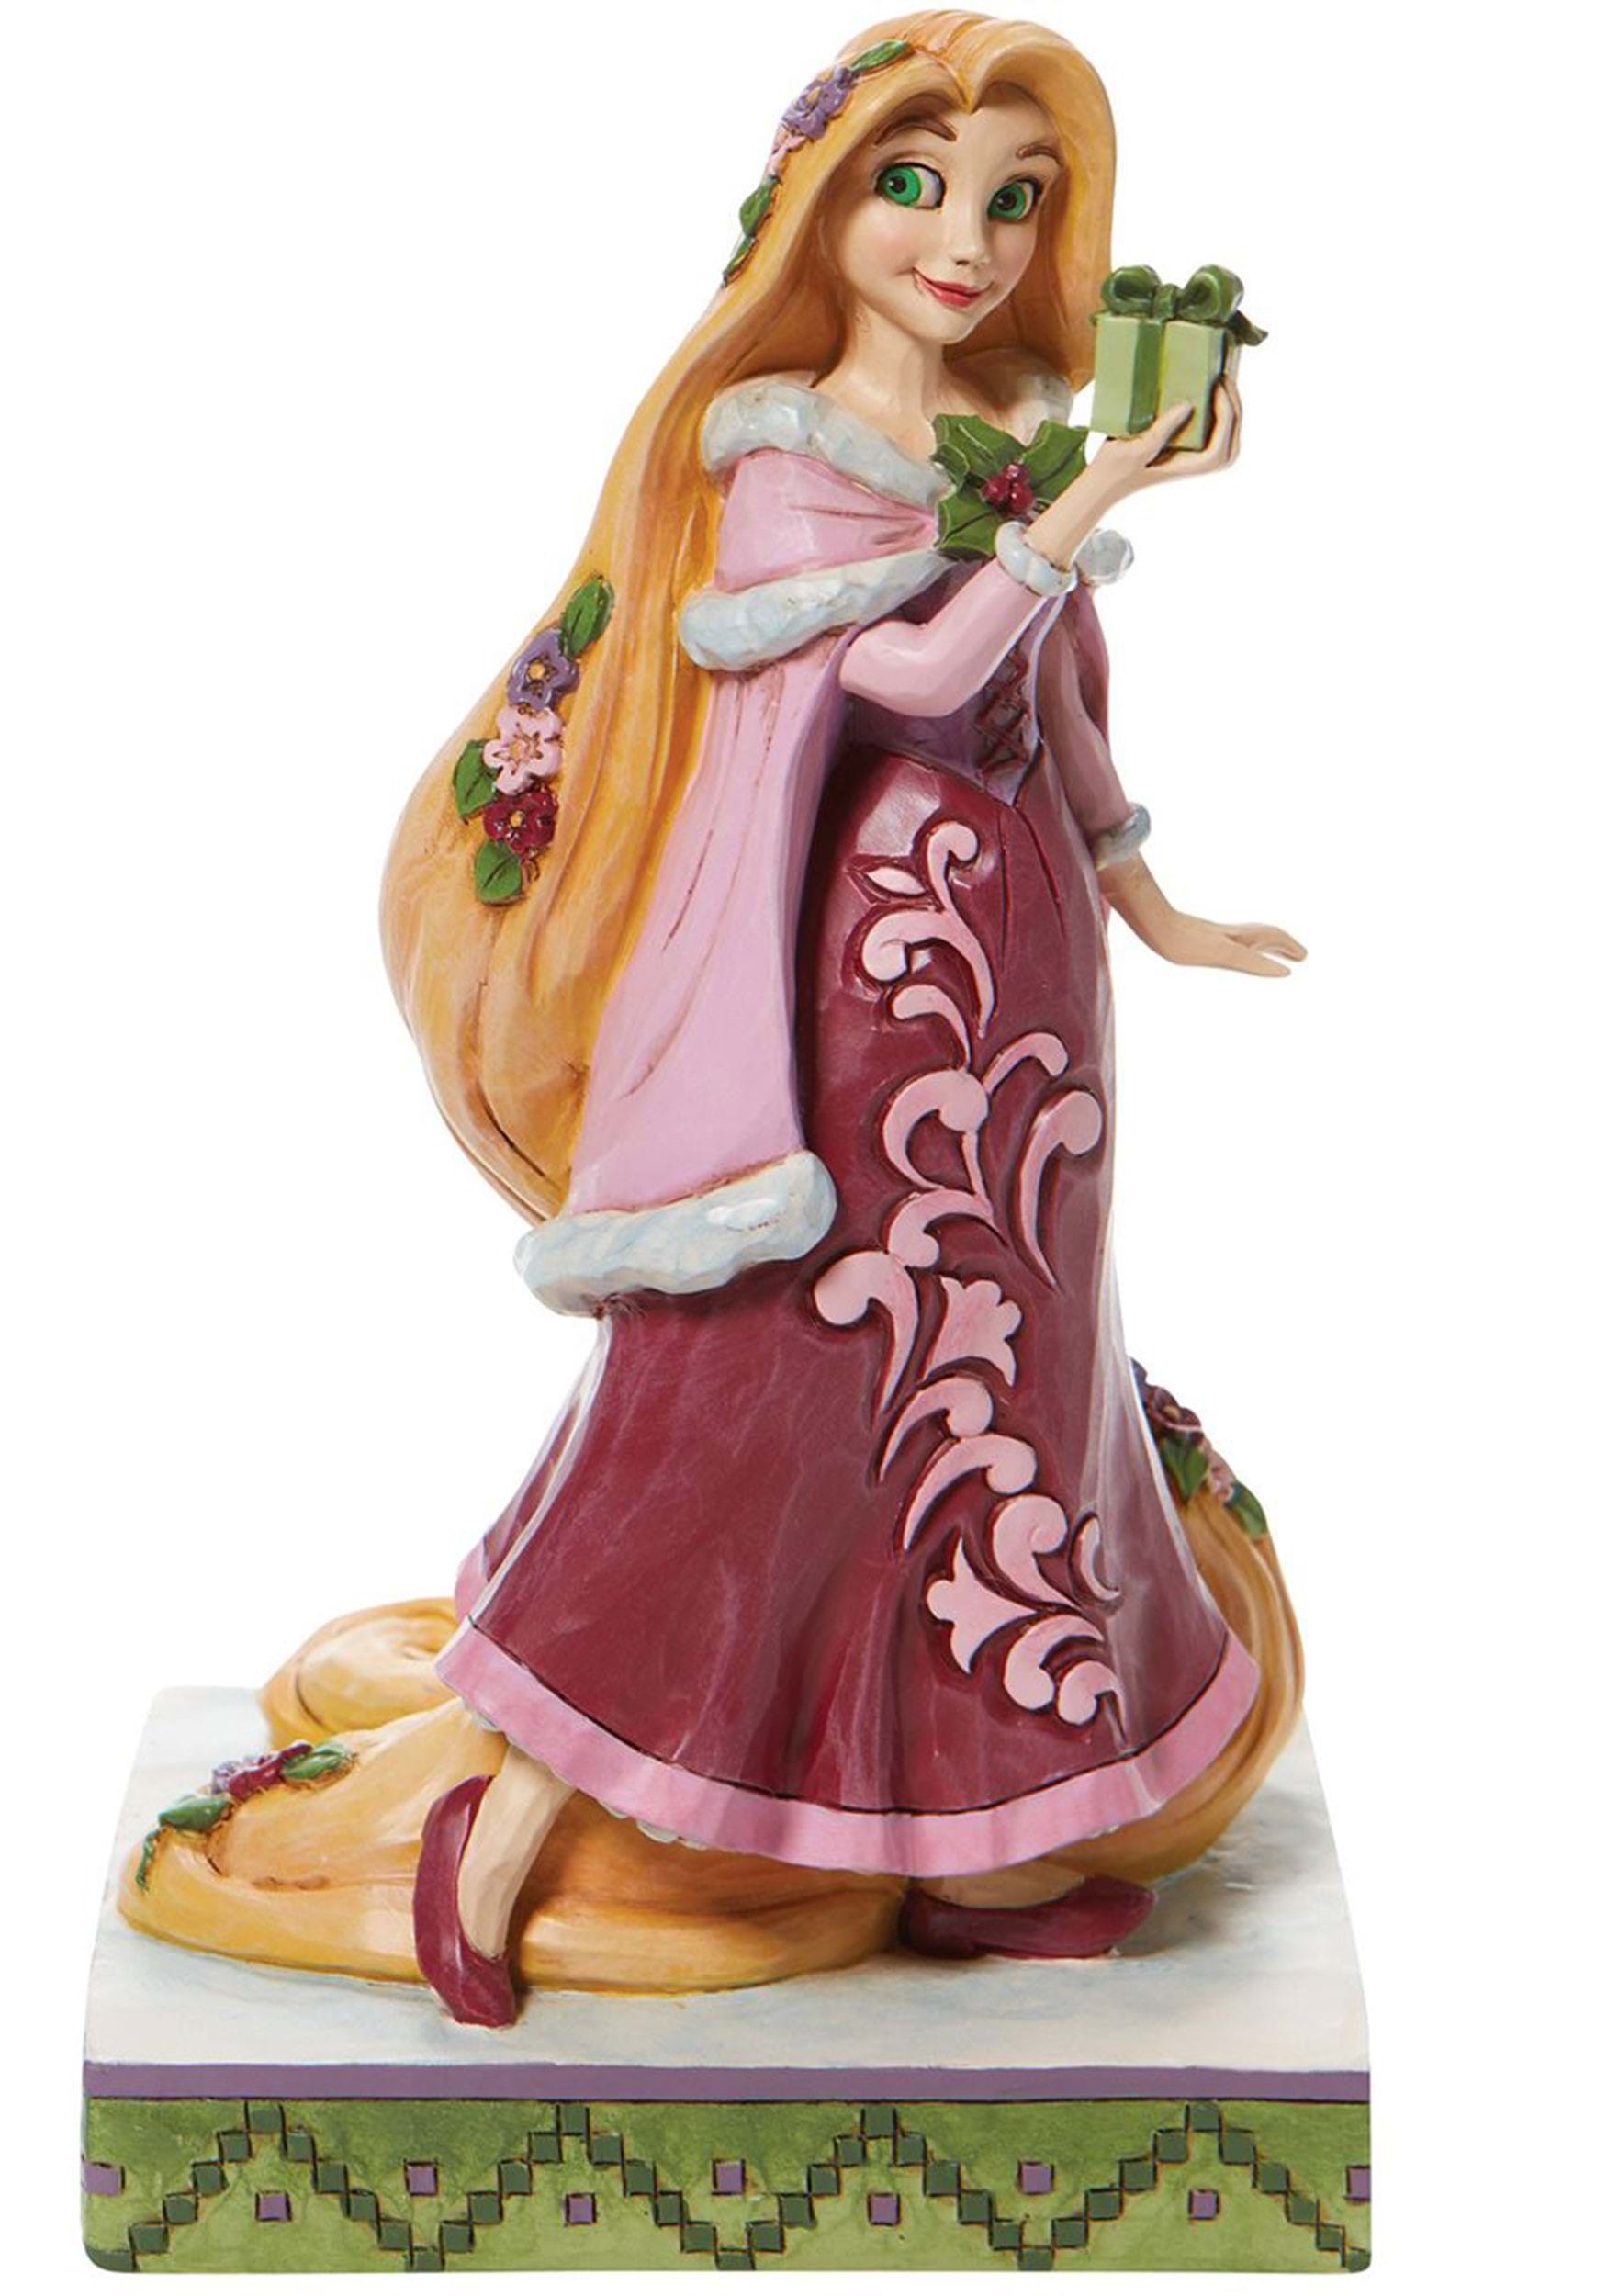 Disney Traditions Princess Passion Figurines - Full Range Available